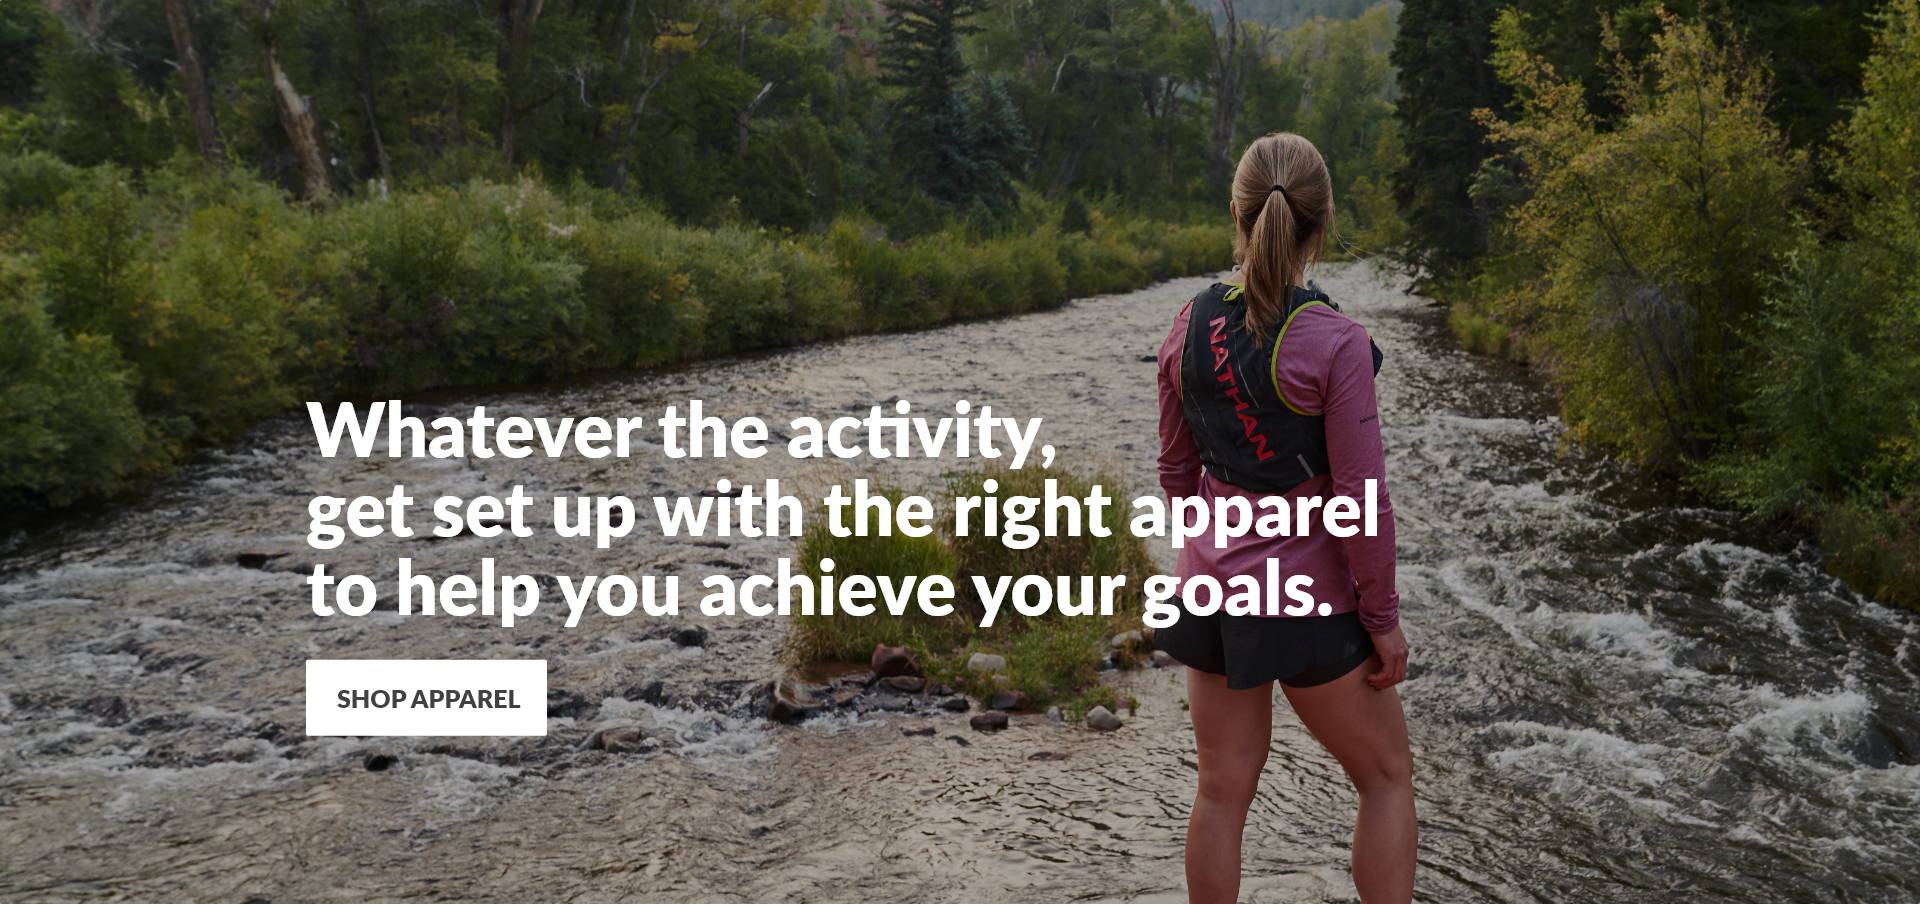 Whatever the activity, get set up with the right apparel to help you achieve your goals. Shop Apparel